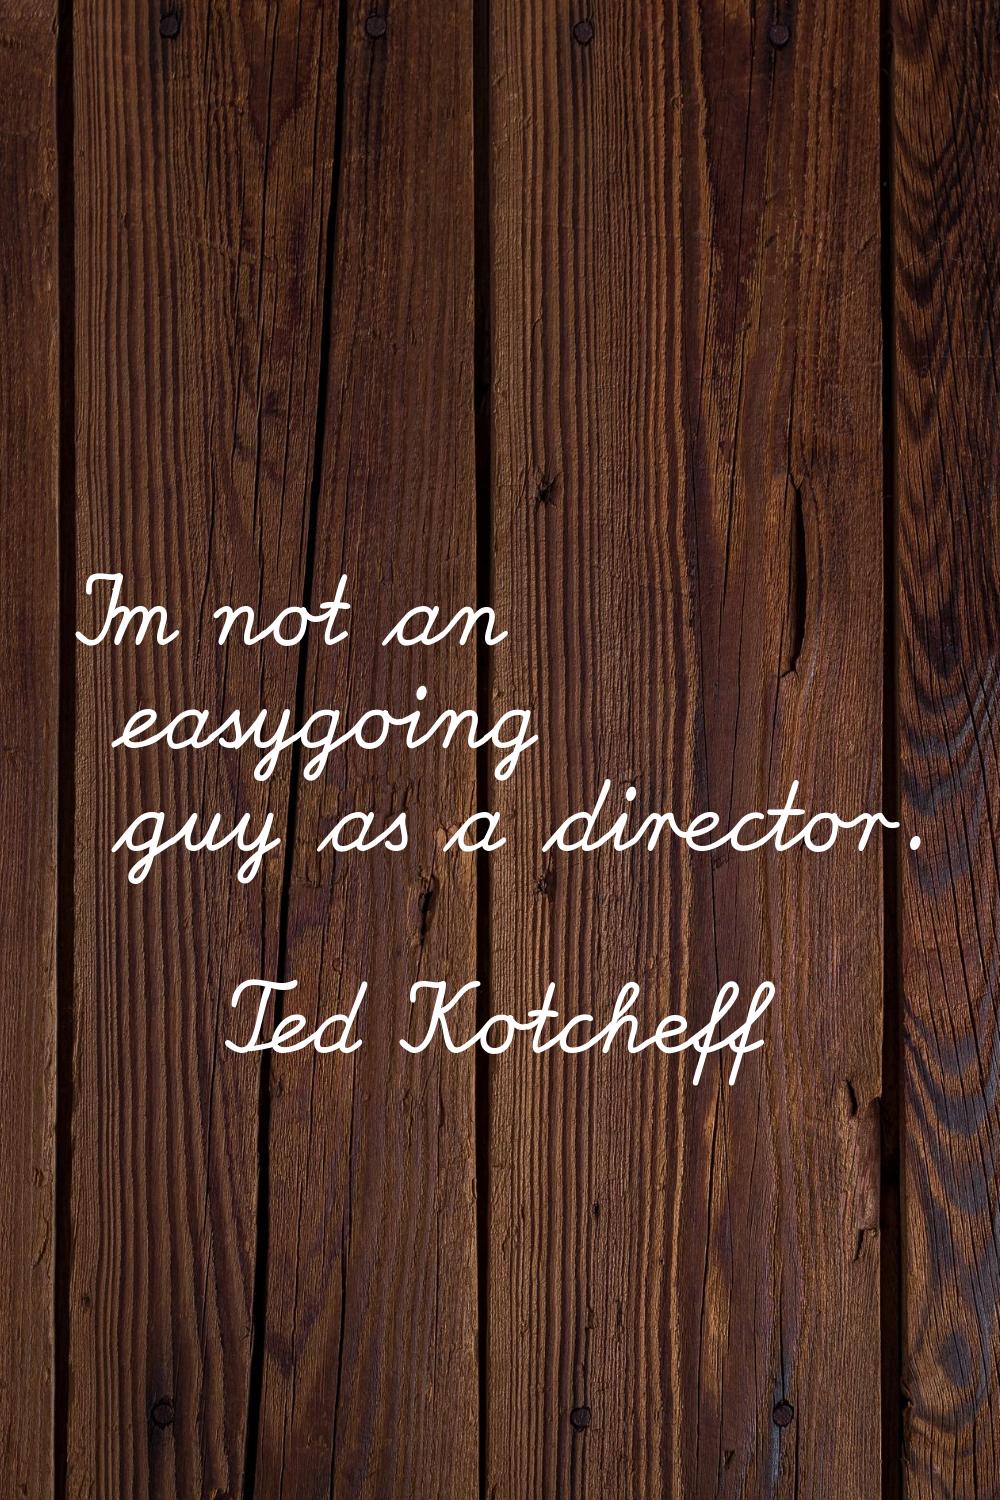 I'm not an easygoing guy as a director.